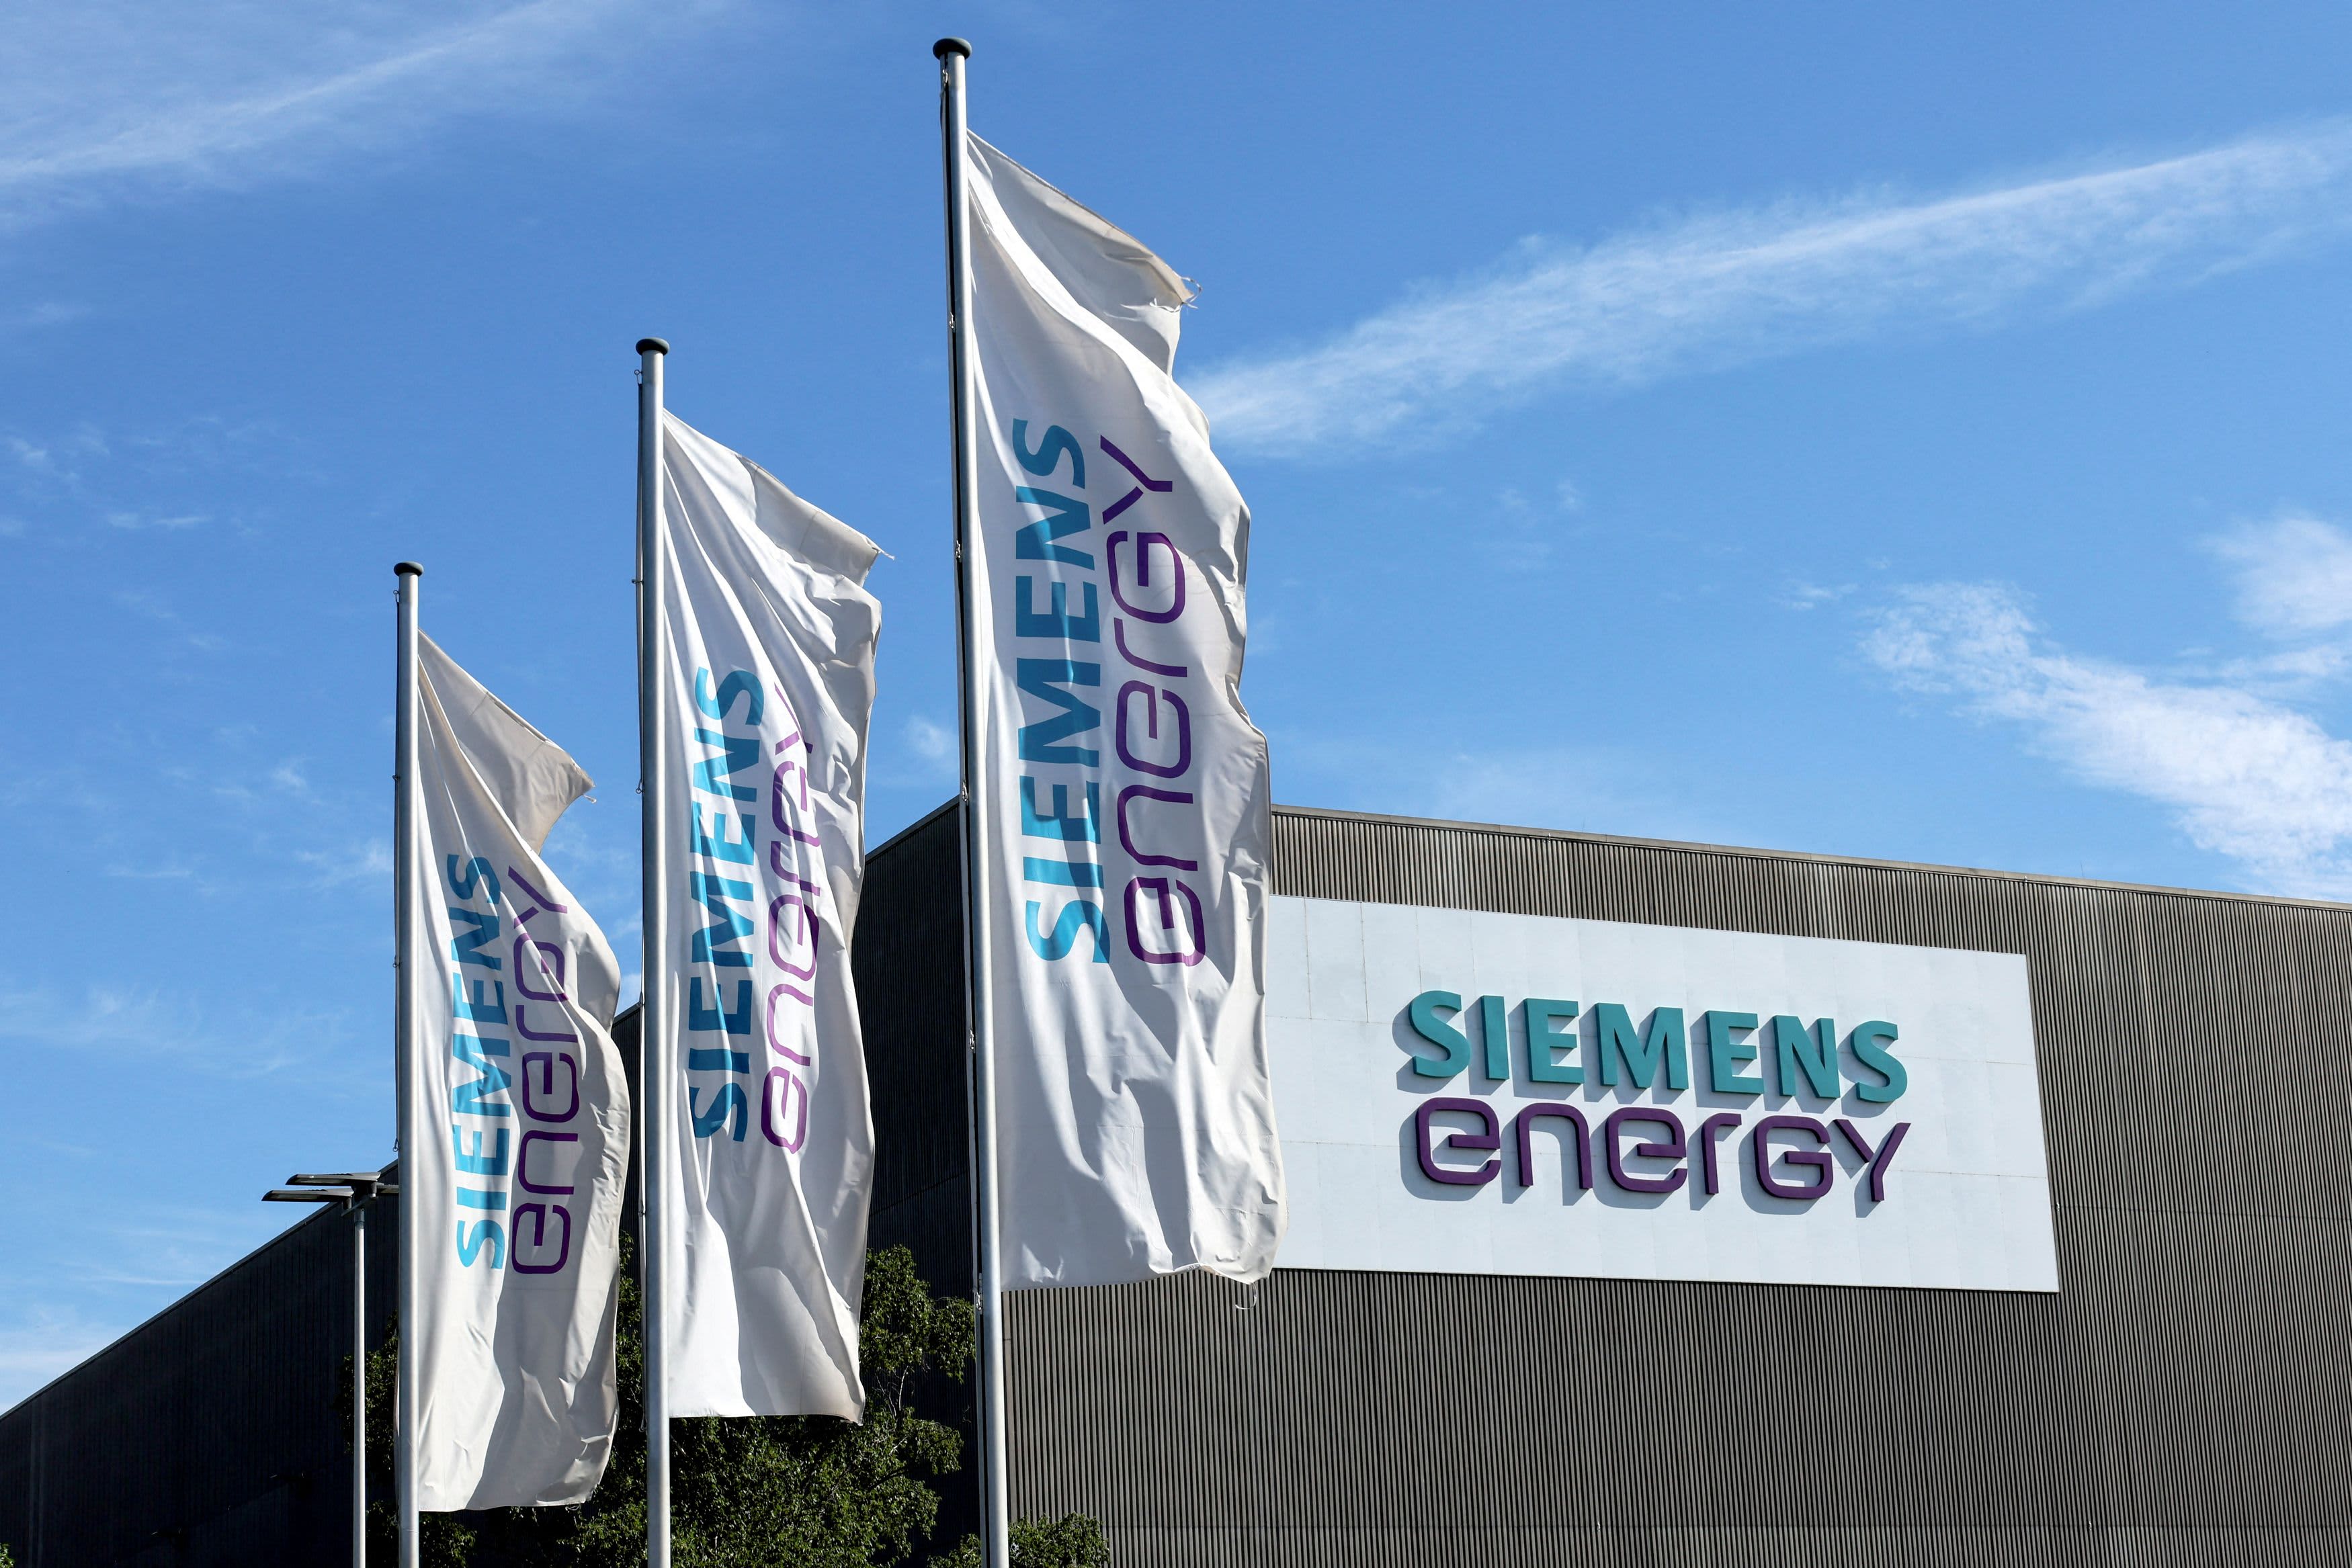 Siemens Energy shares fell 32% after the company requested support from the German government